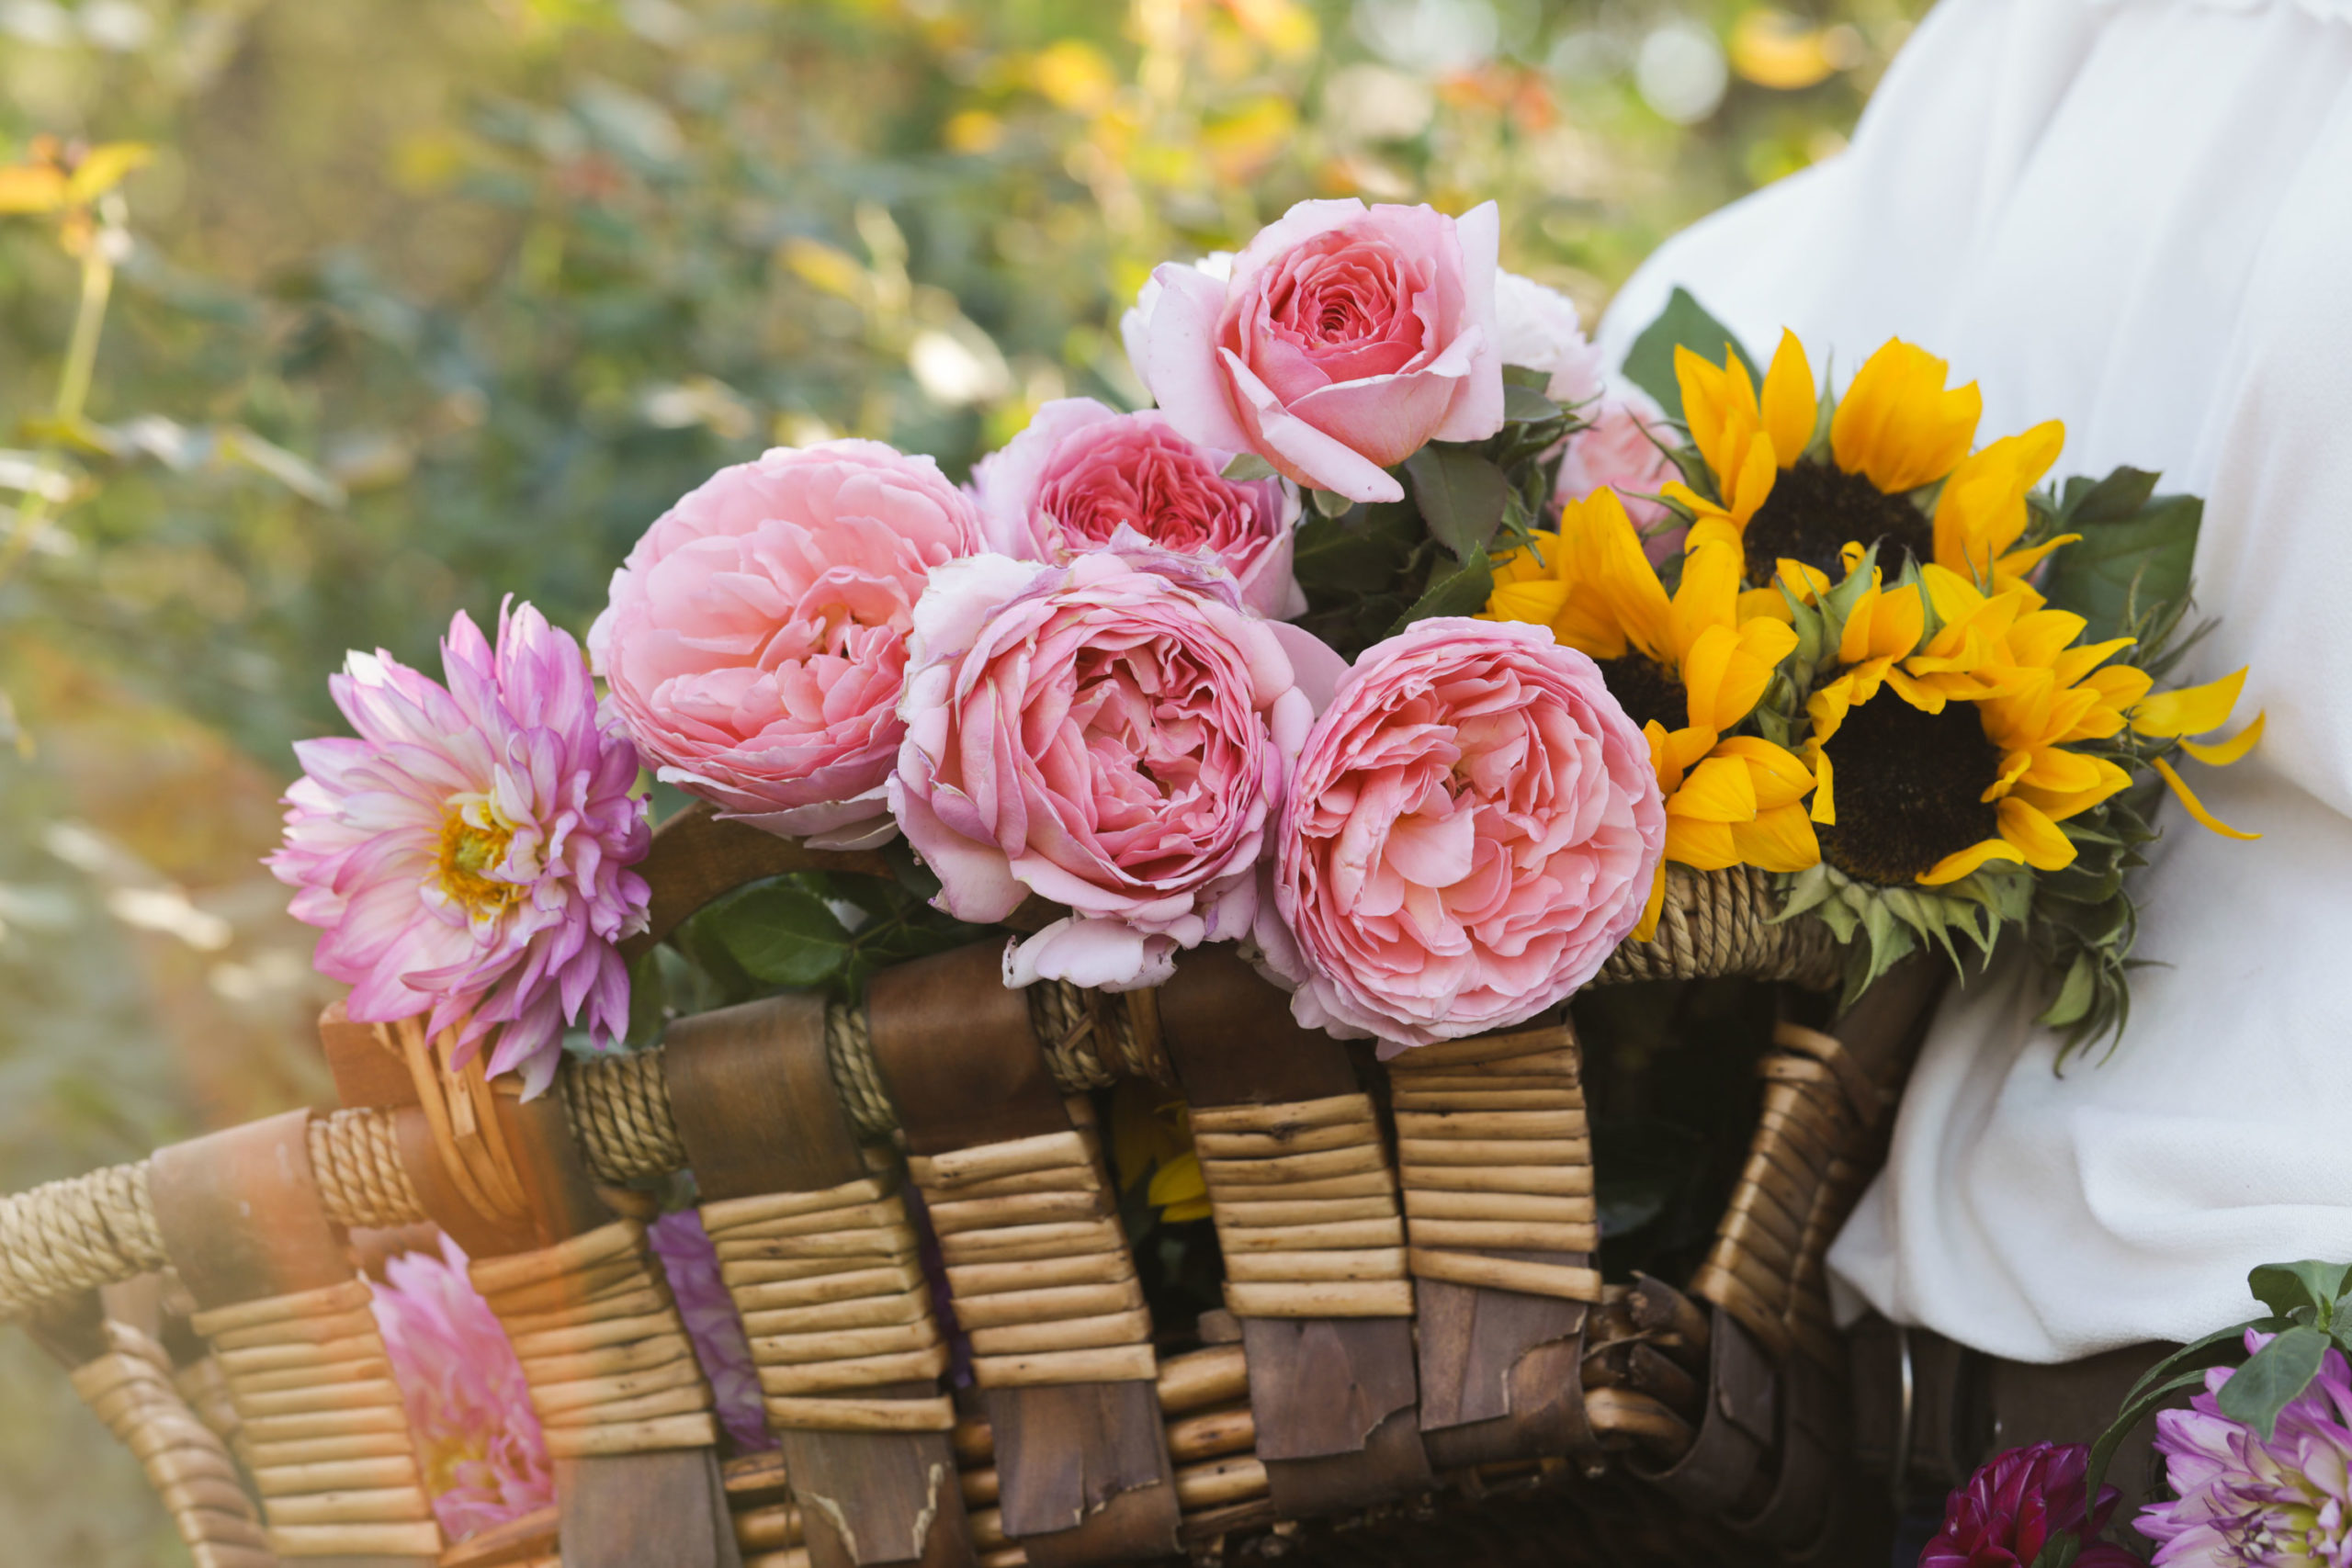 A person holding a basket of flowers